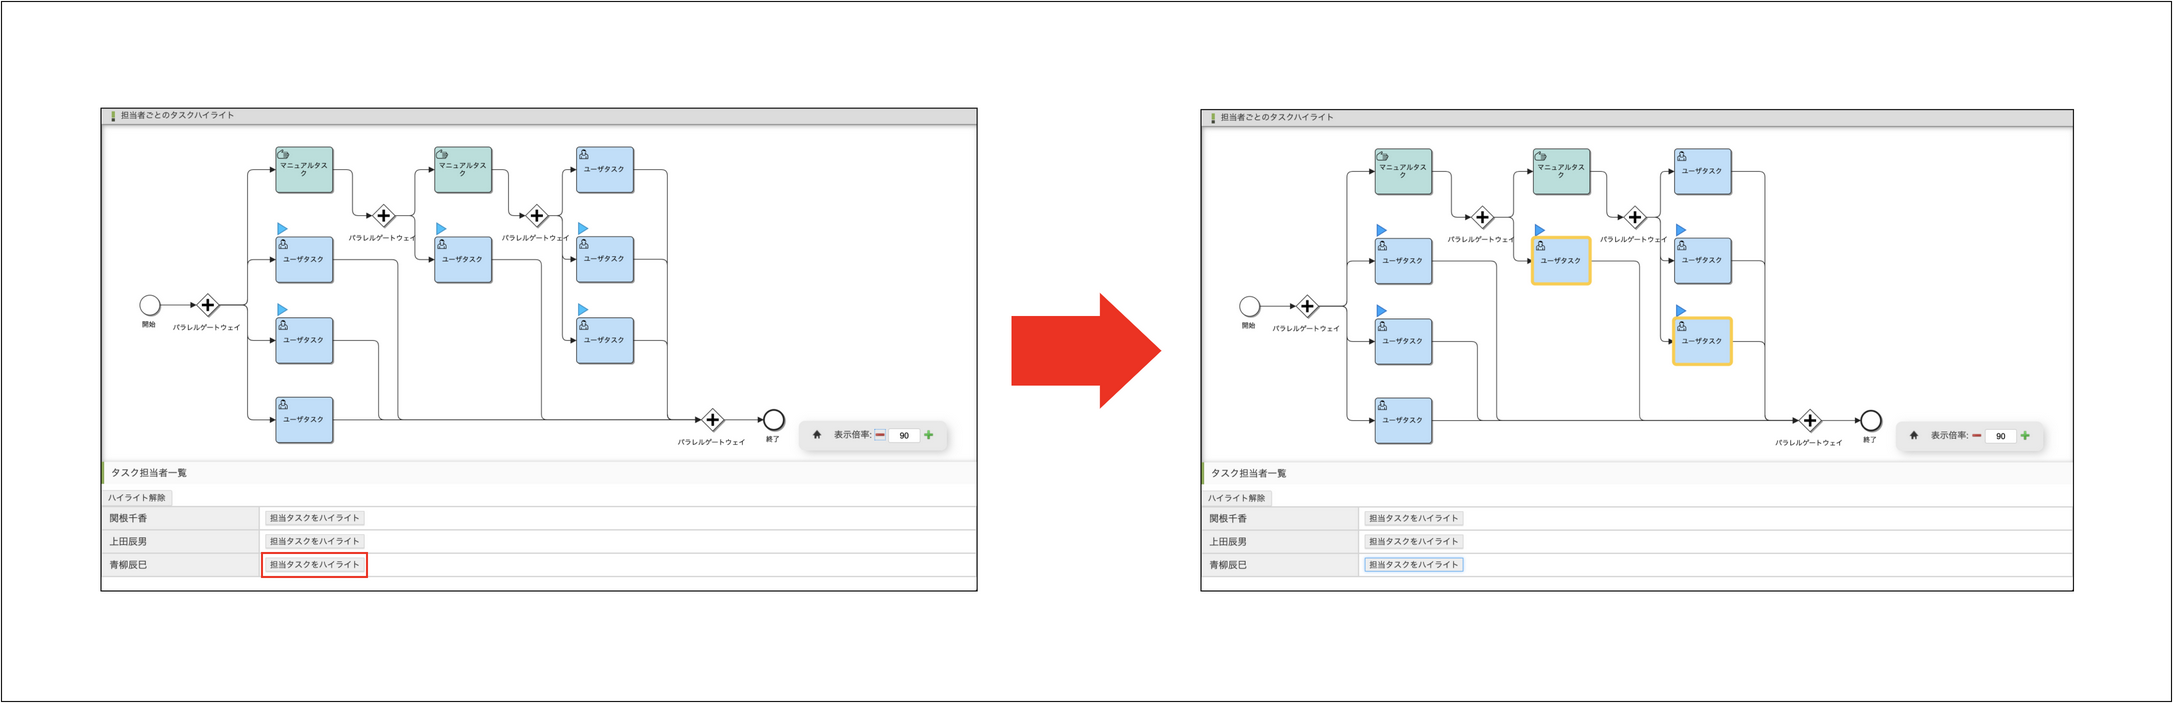 ../../../../_images/process_diagram_bloommaker_element-show_task_assignee_0001.png